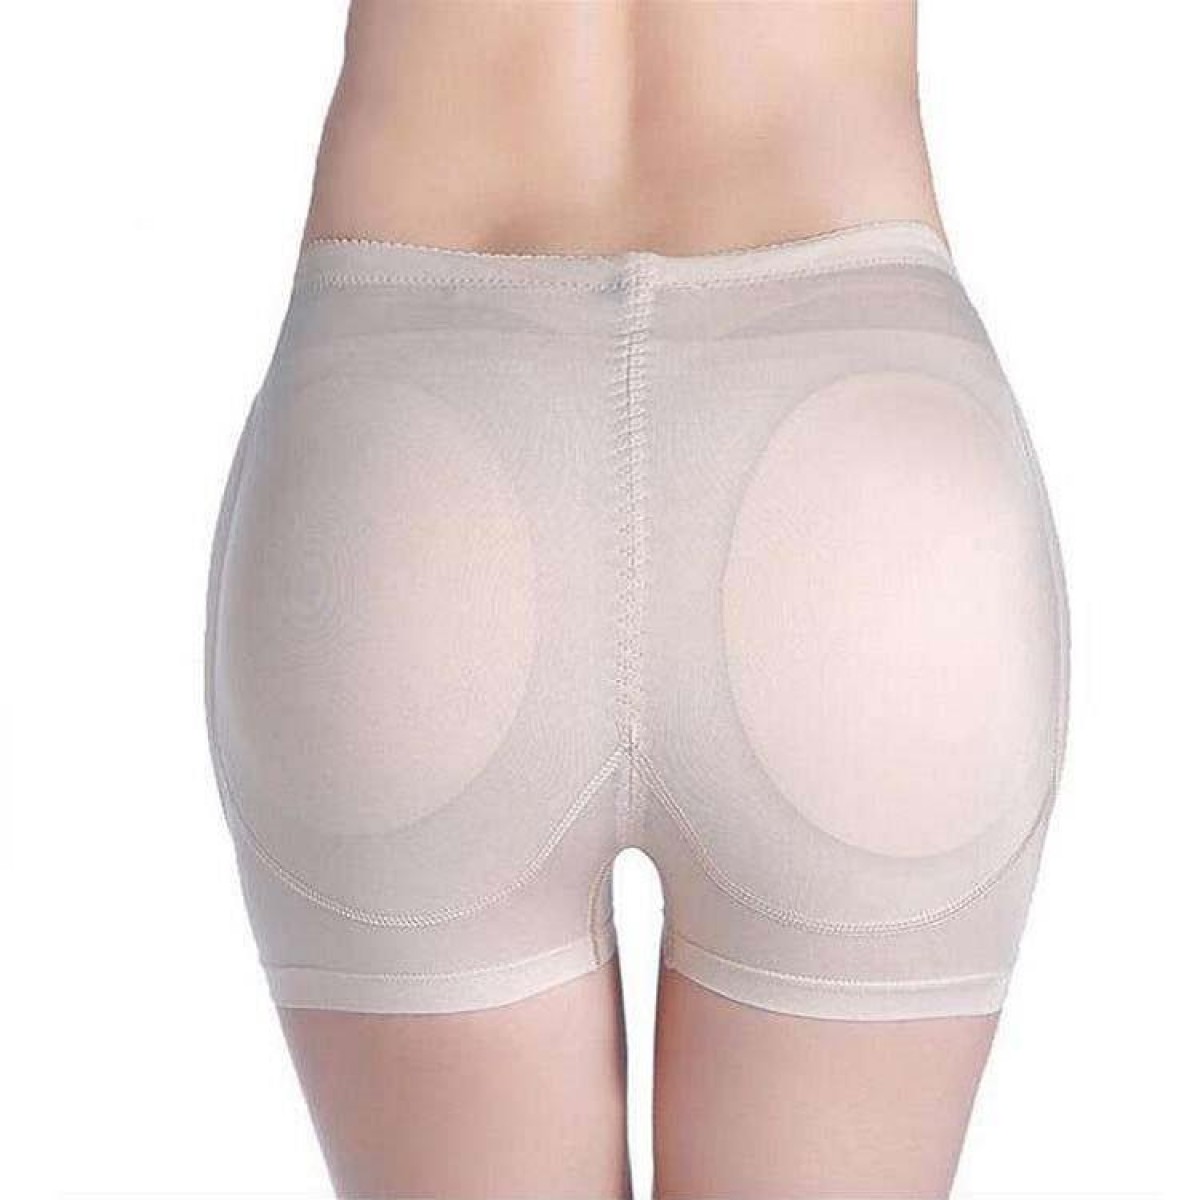 Full Buttocks and Hips Sponge Cushion Insert to Increase Hips and Hips Lifting Panties, Size: L(Black)